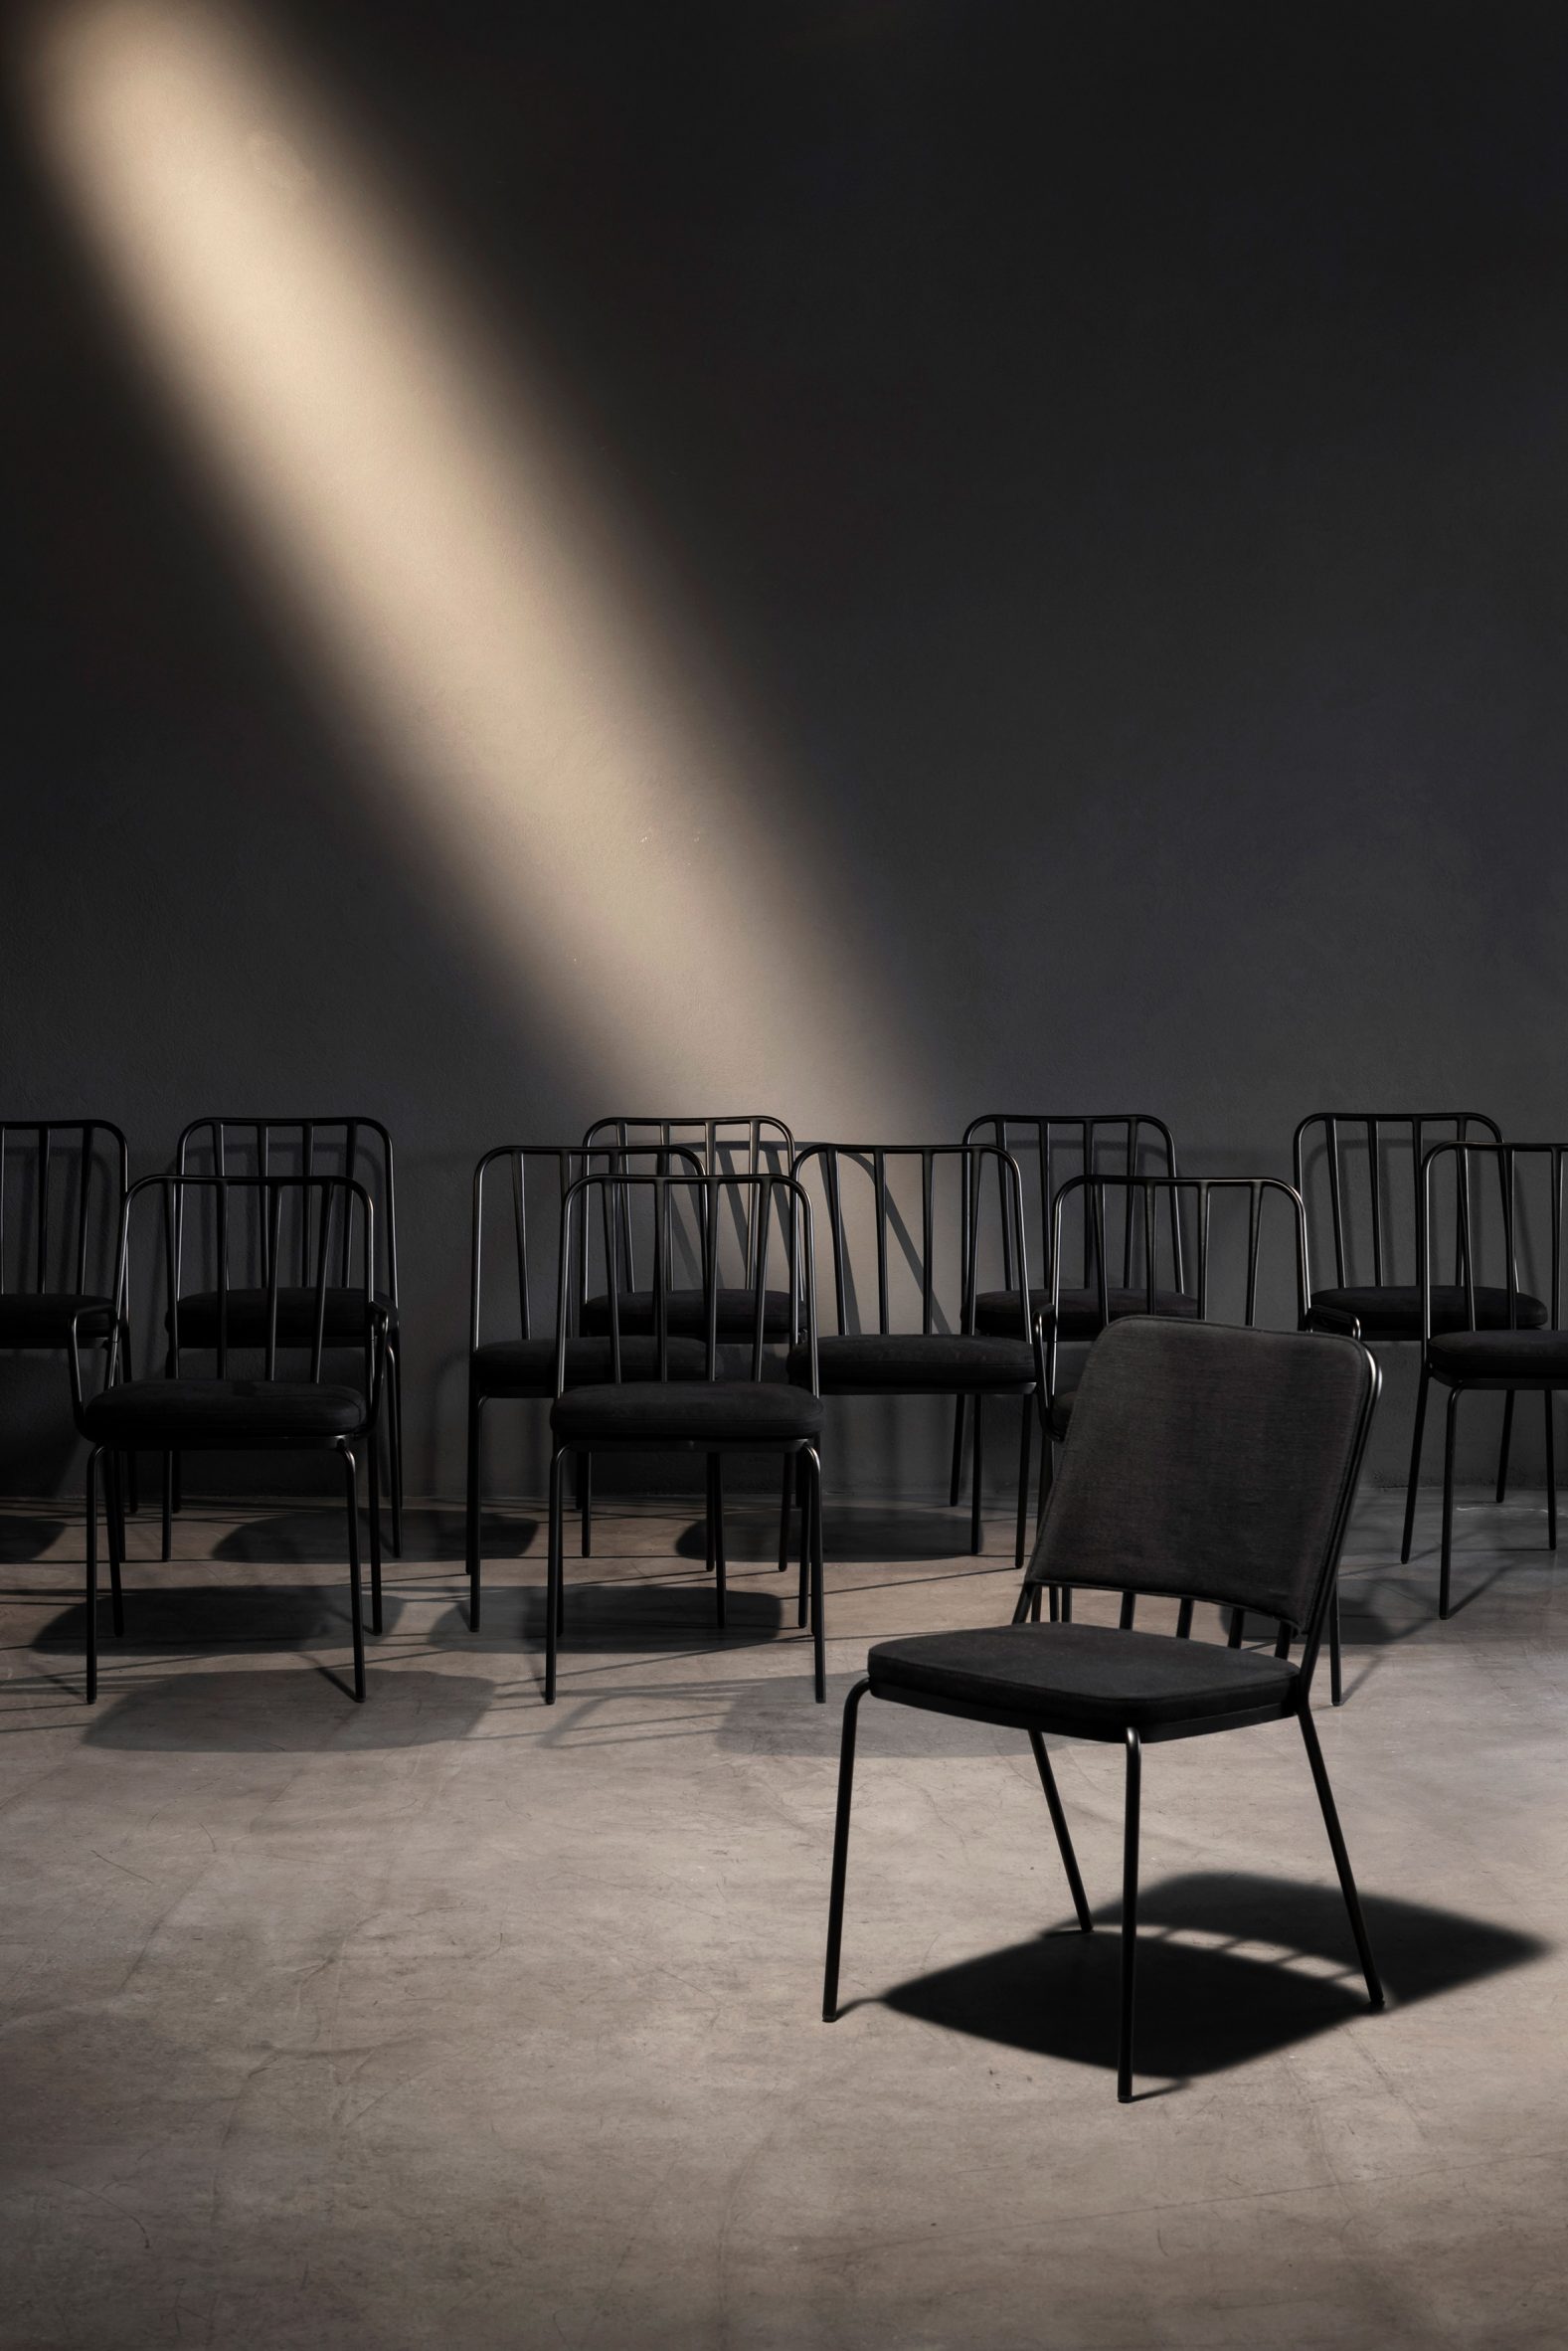 Black Palm X chairs by Jean-Michel Wilmotte for Parla lined up in a row with one in the front